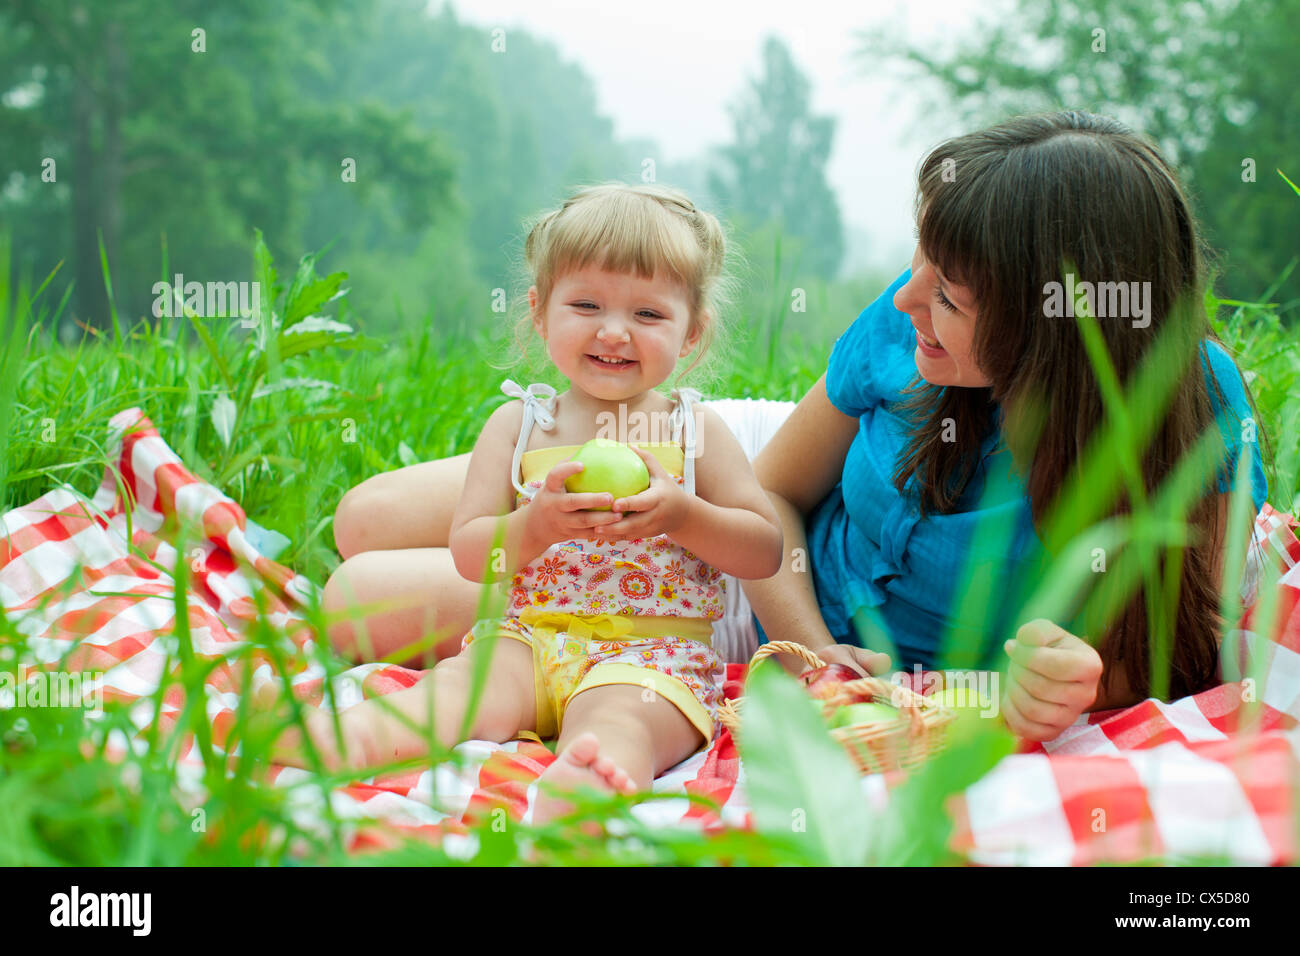 mother and daughter have picnic eating healthy food outdoor Stock Photo